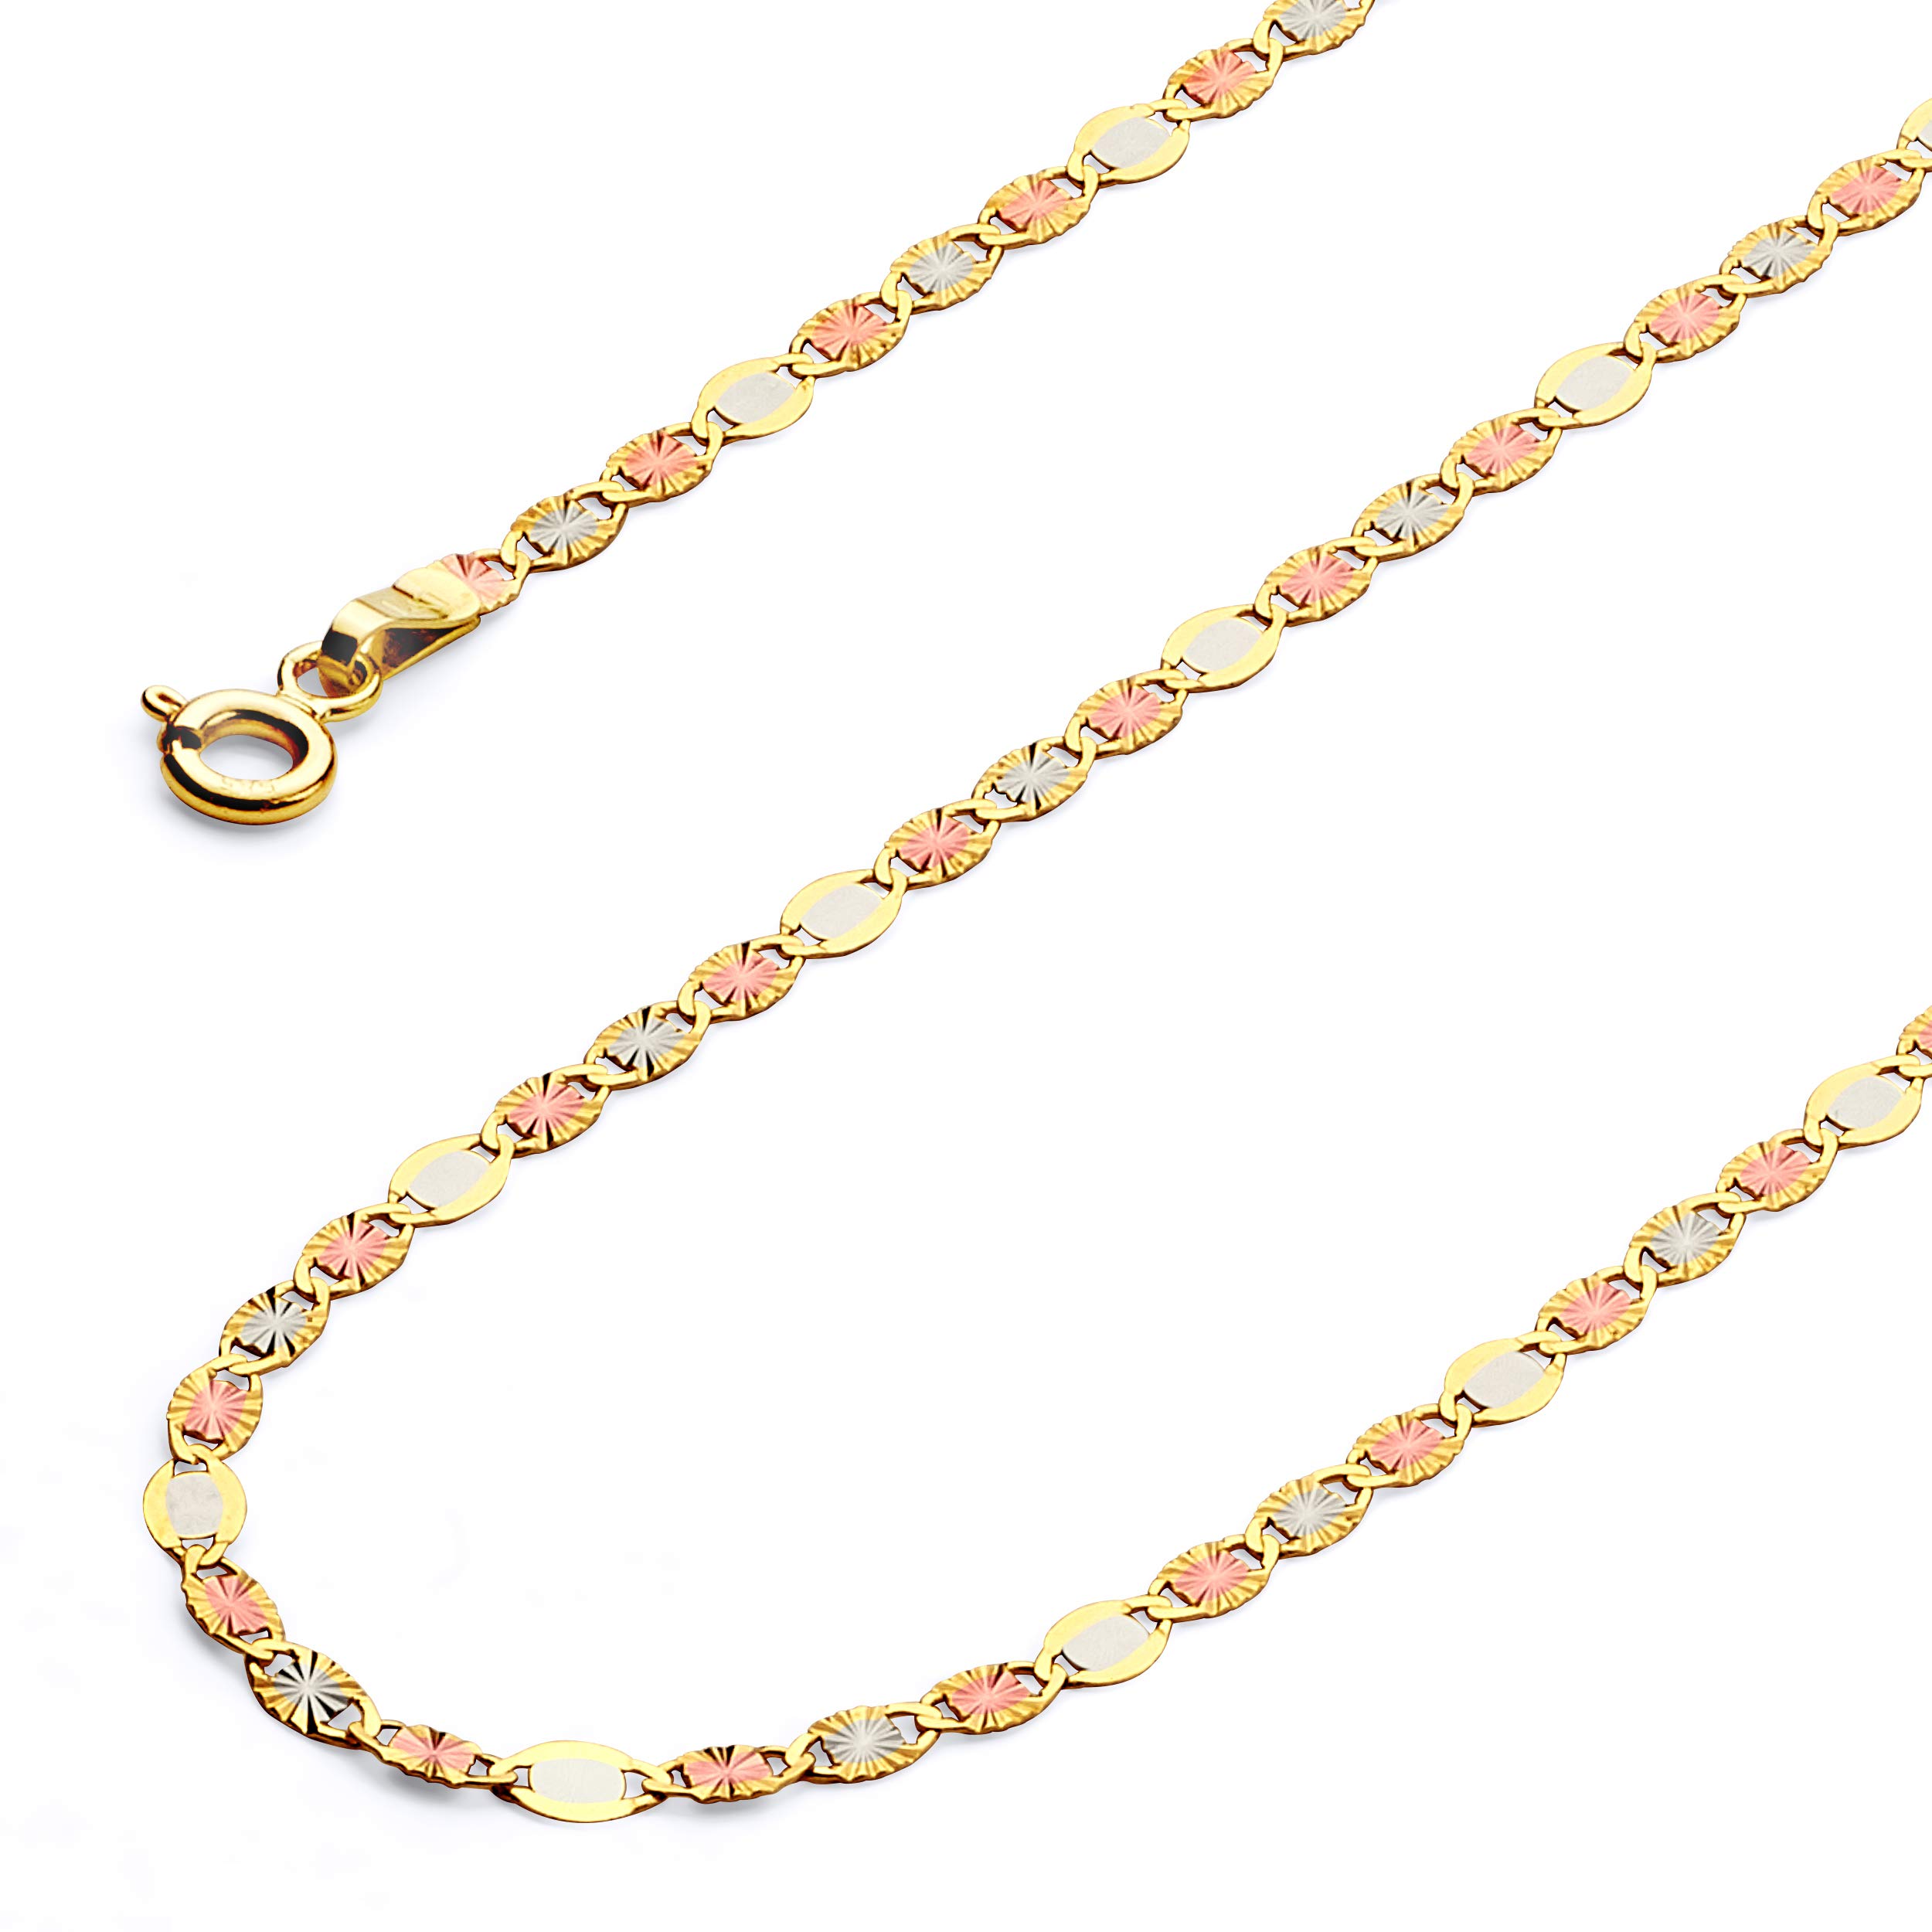 The World Jewelry Center 14k Real Tri Color Gold Solid 2mm Flat Star Diamond Cut Chain Necklace with Spring Ring Clasp